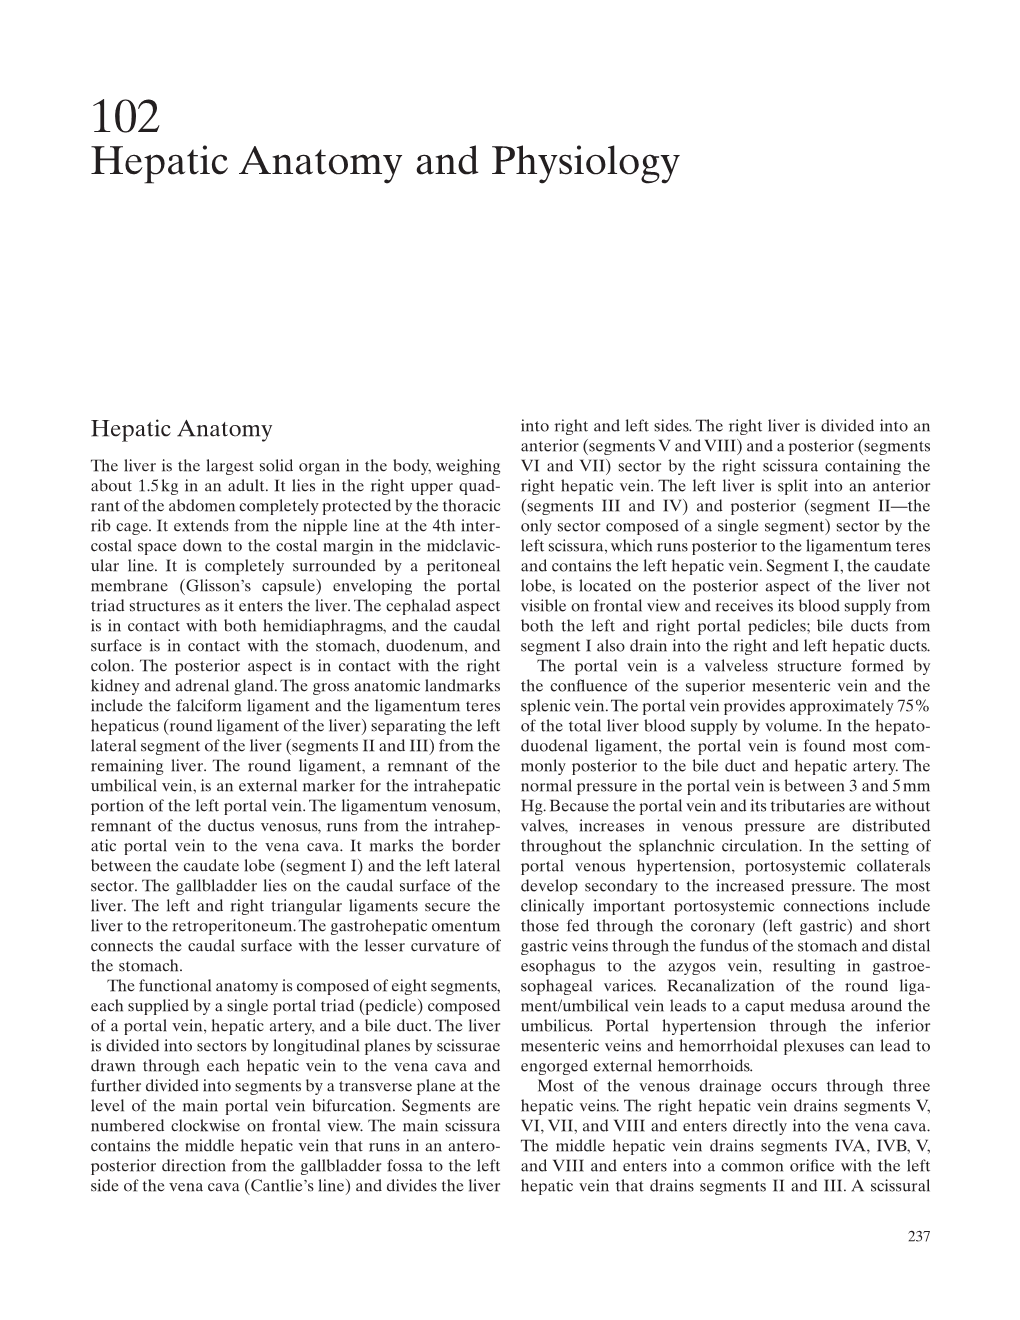 Hepatic Anatomy and Physiology